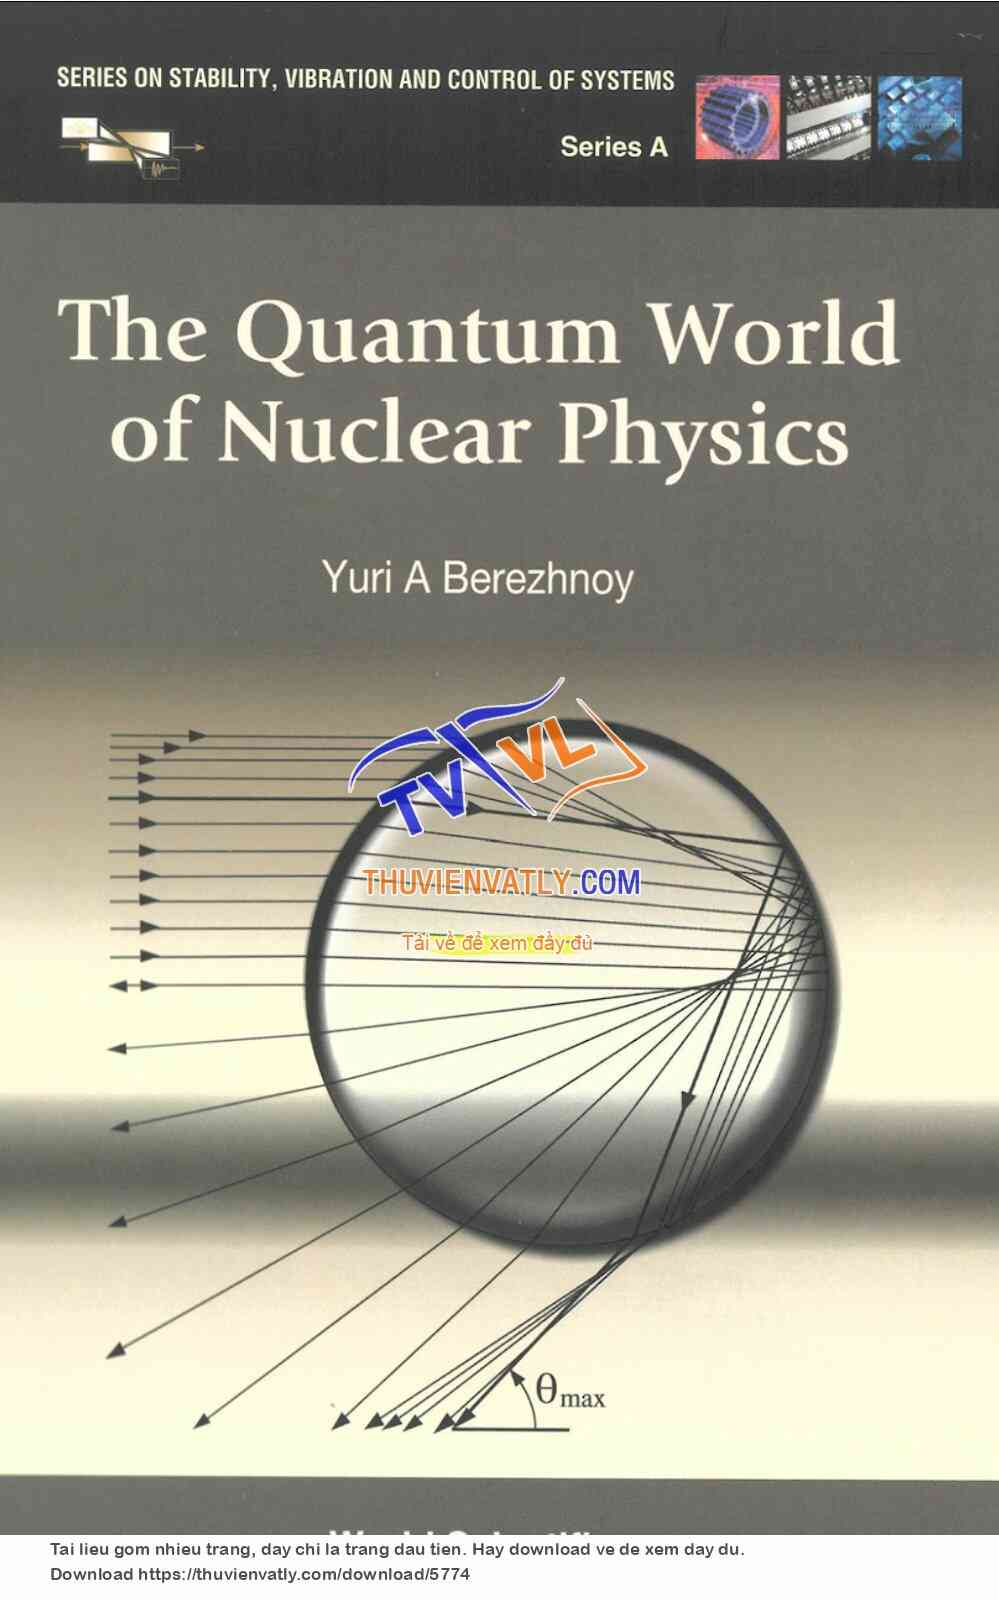 The Quantum World of Nuclear Physics